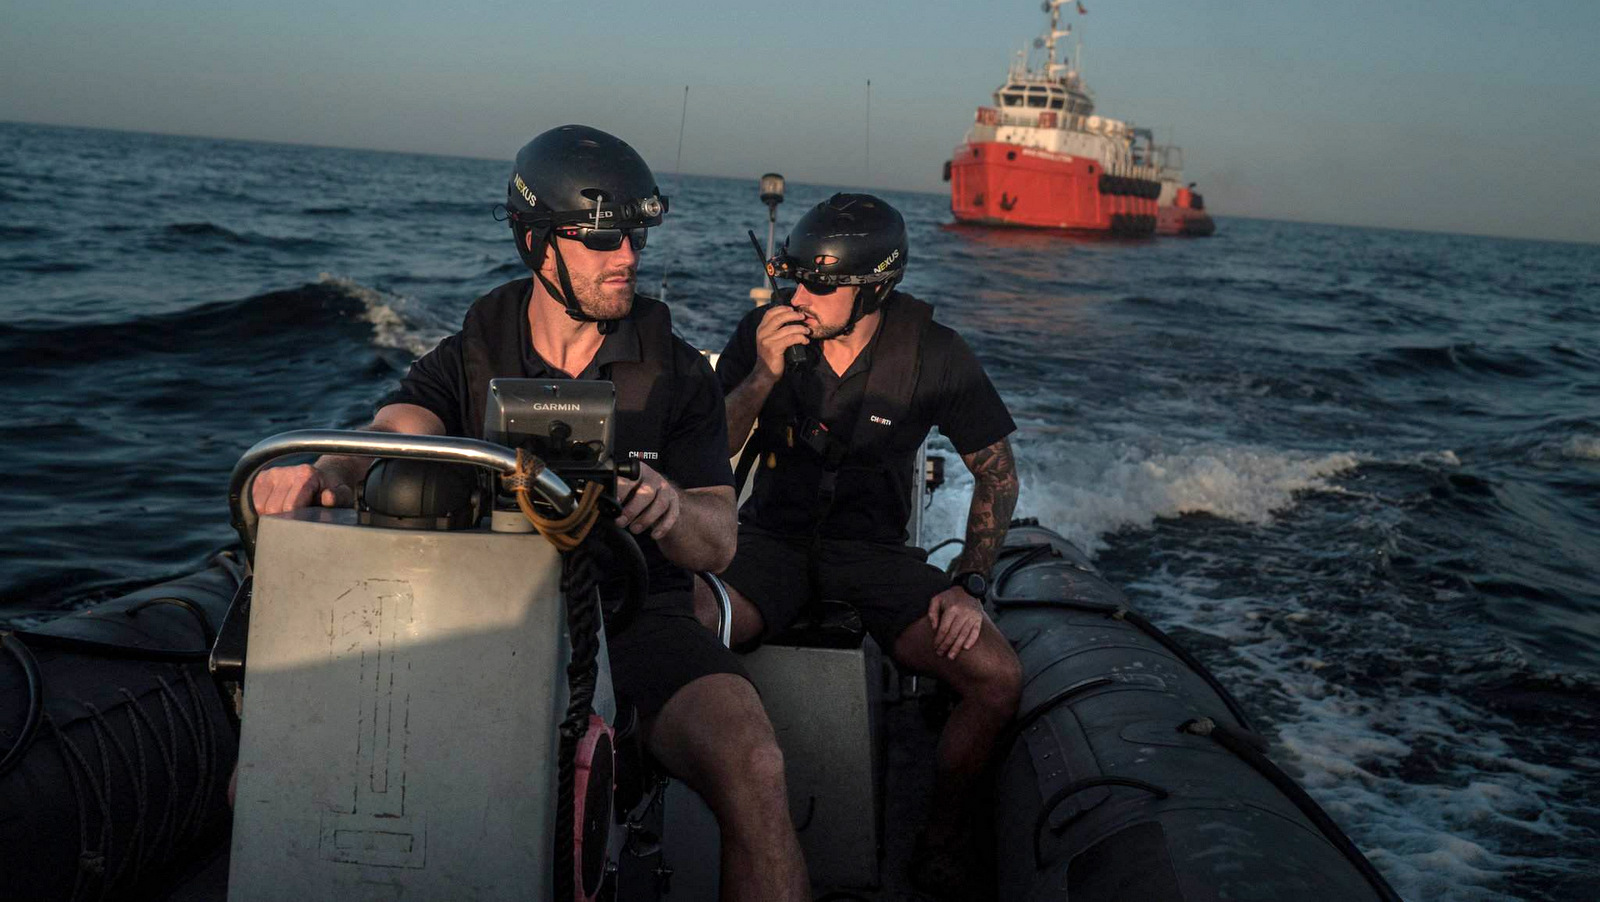 Private military contractors are being increasingly employed to police the world's waterways.